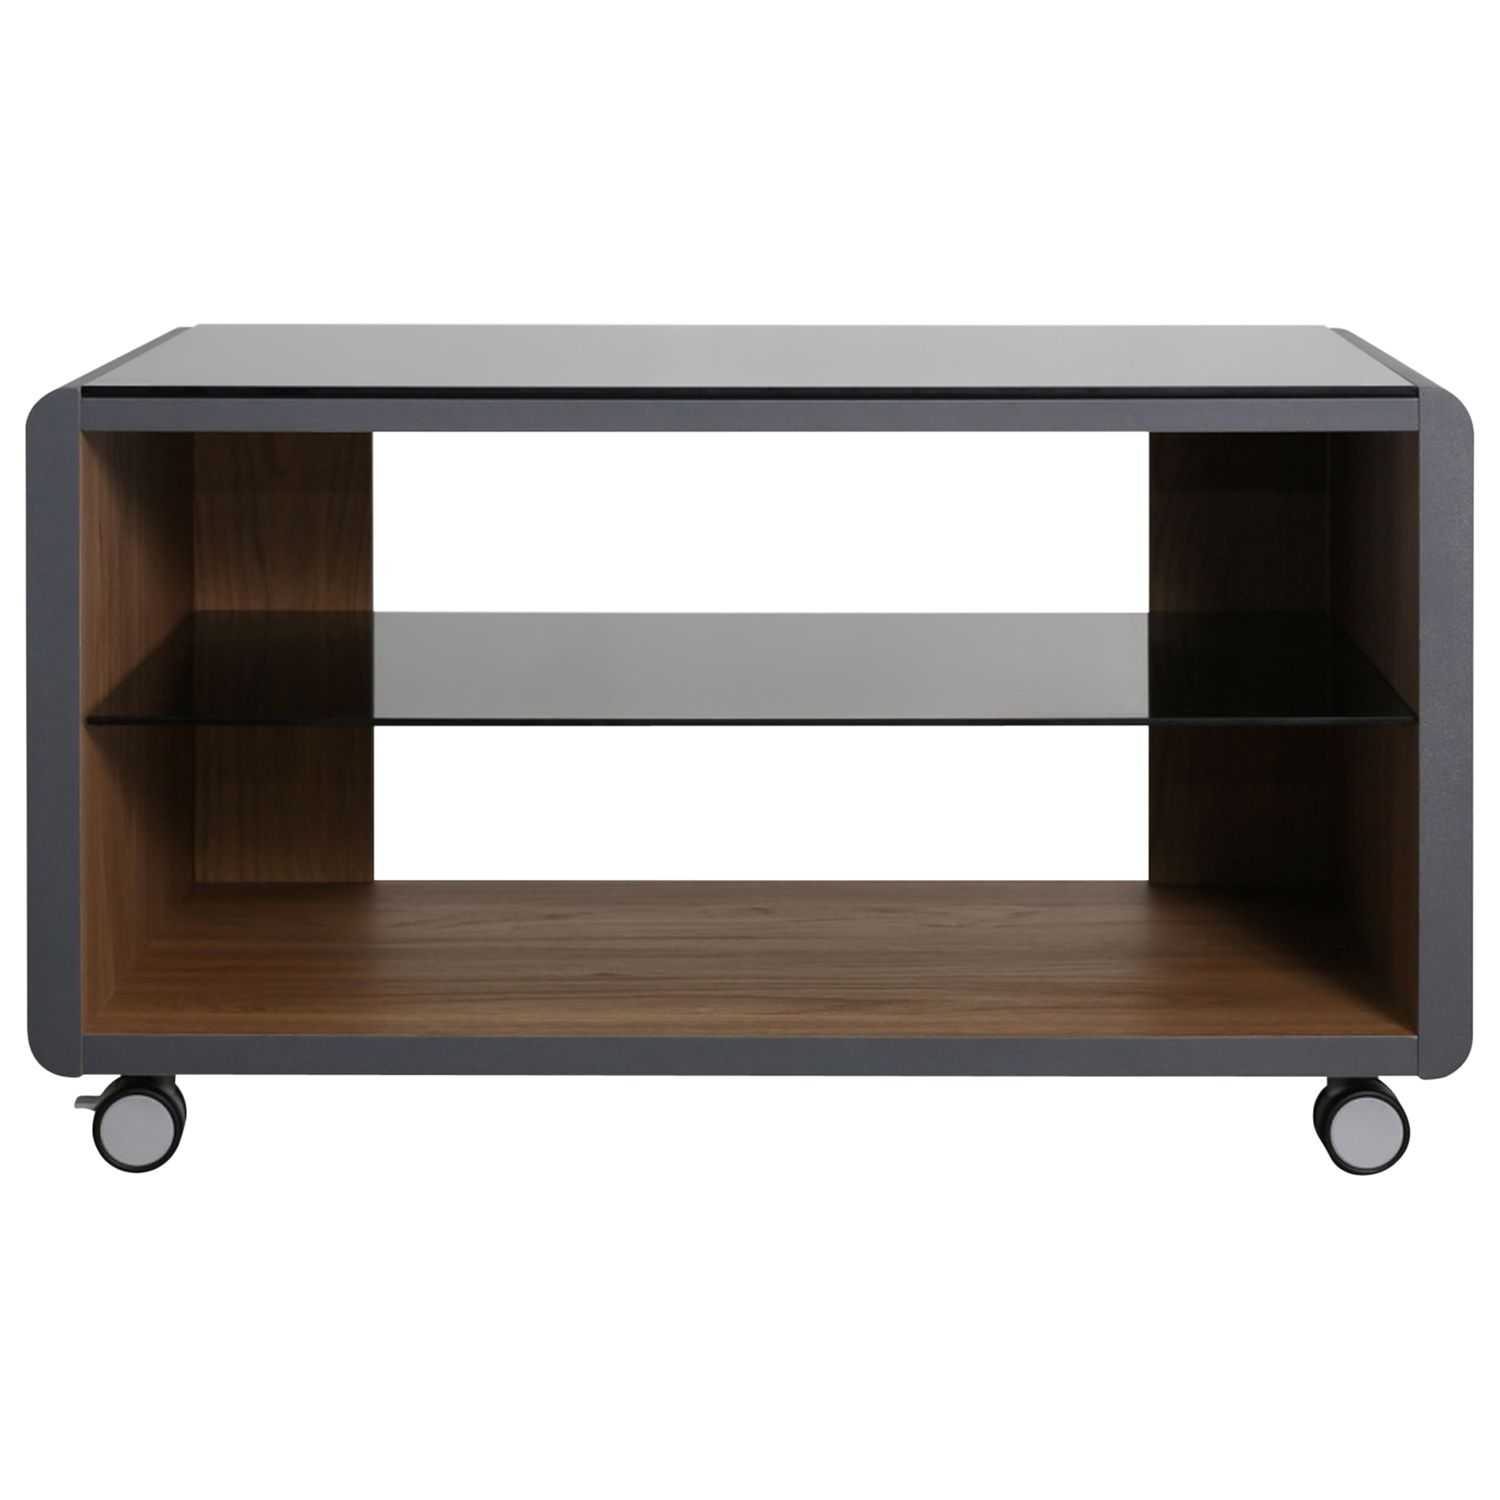 Optimum Concept 800 TV Stand for up to 32-inch TVs, Walnut, width 80cm